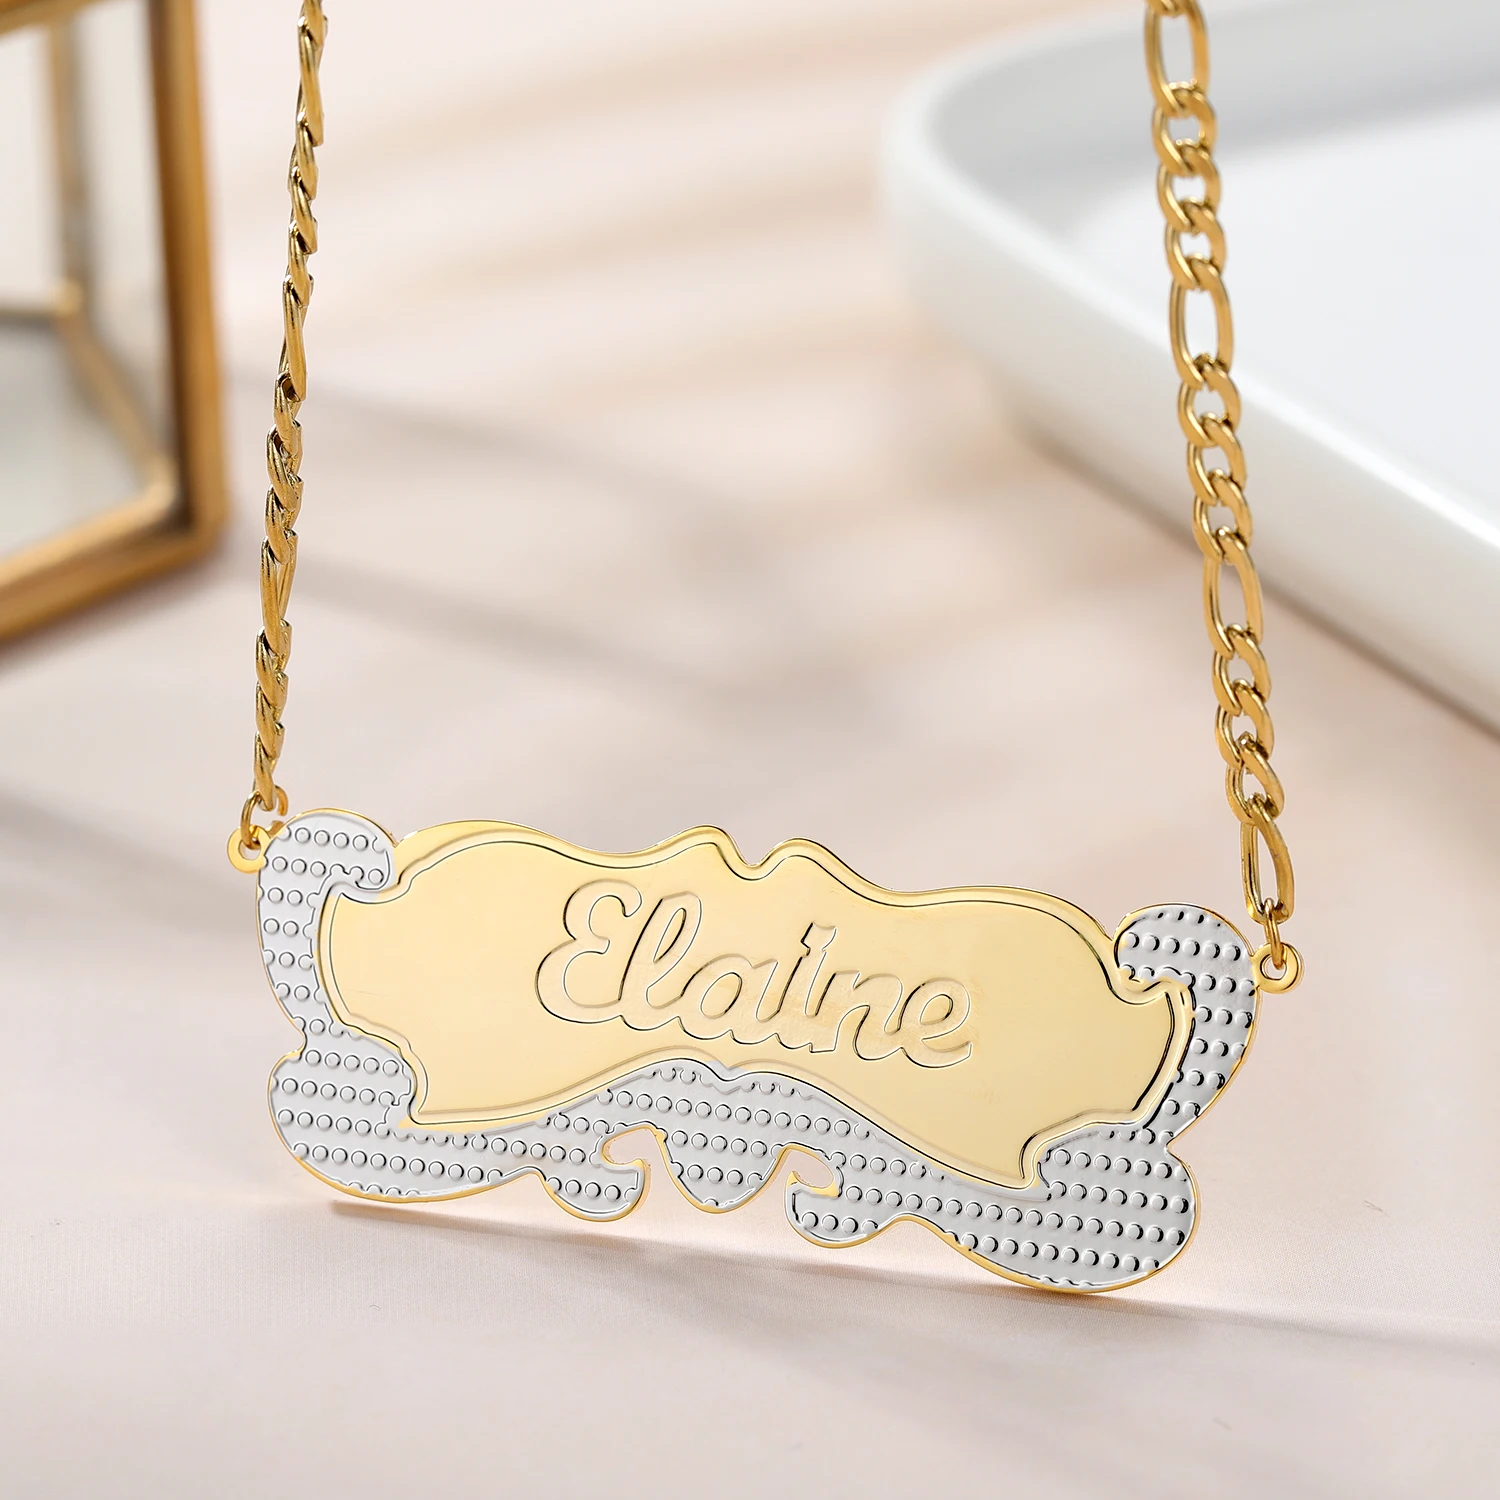 Double Gold Plated Name Necklace Laser Engraved Nameplate Pendant With Beading Stainless Steel Jewelry Gift For Women